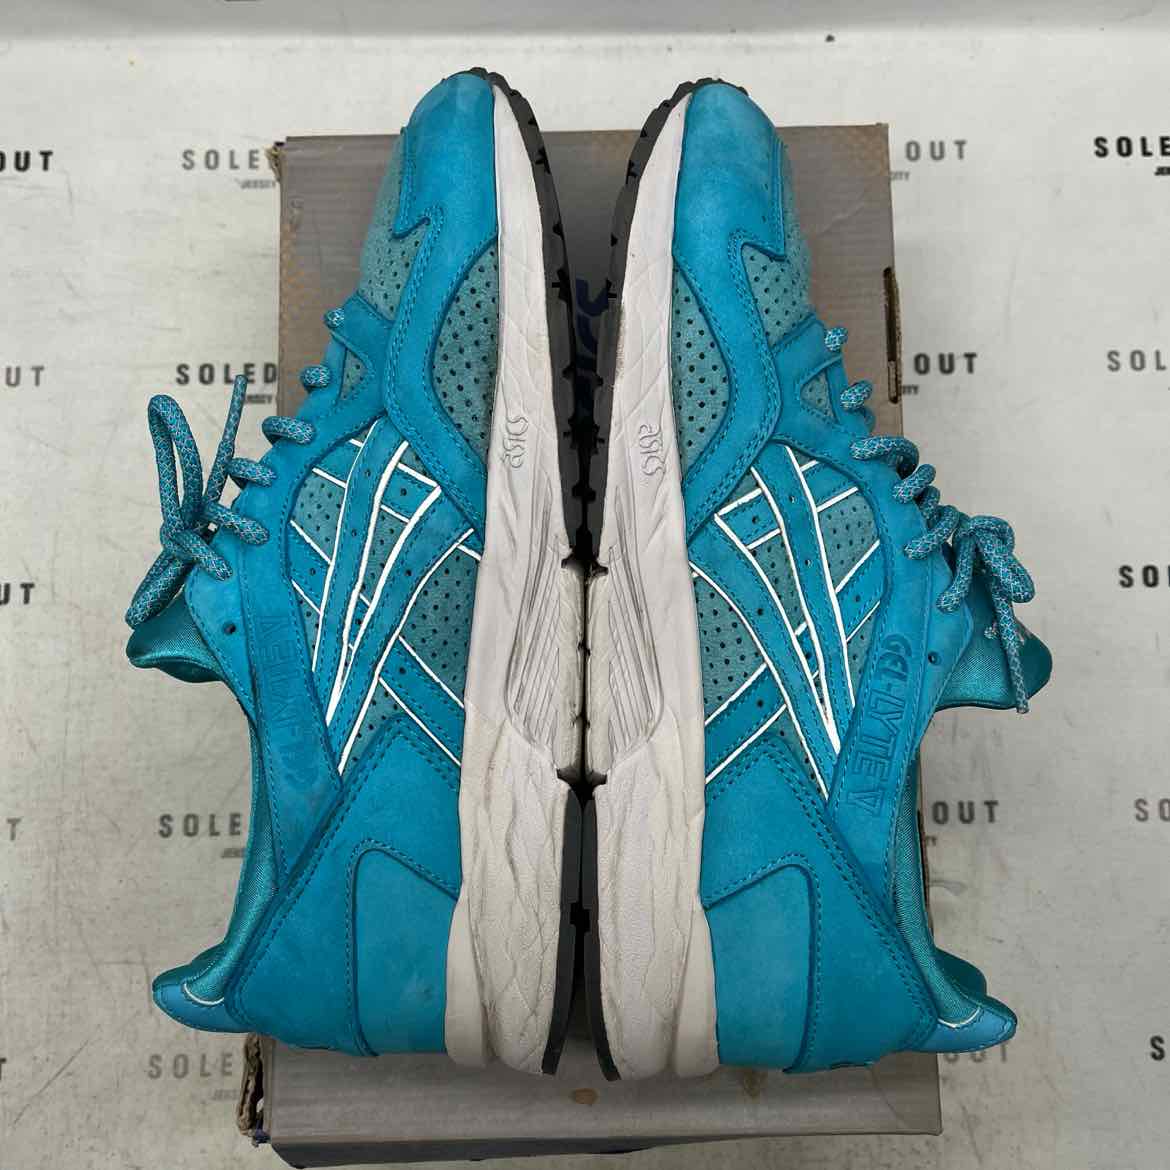 Asics Gel-Lyte 5 &quot;Ronnie Fieg Cove&quot; 2014 Used Size 10